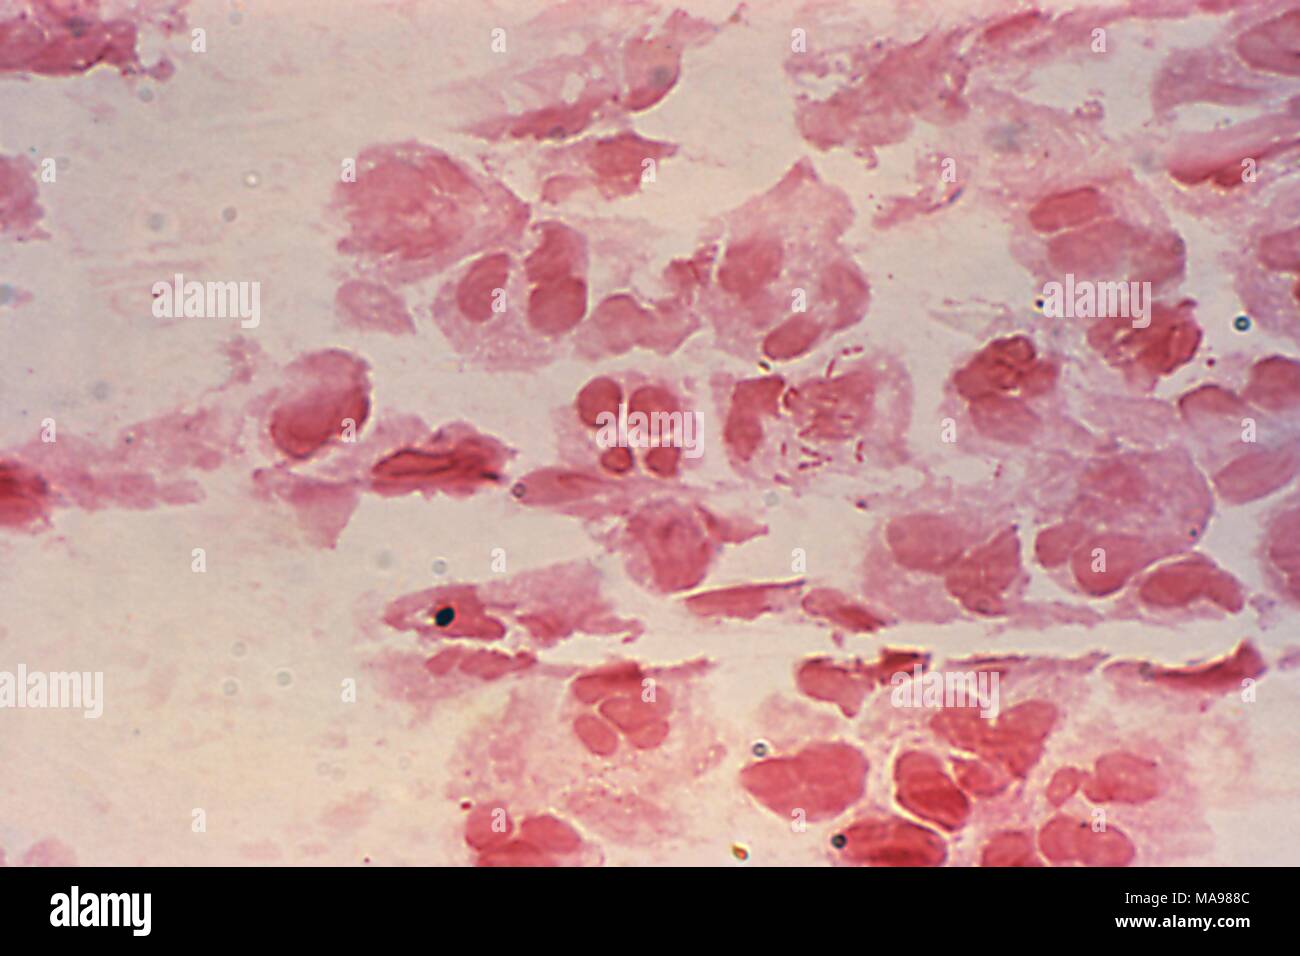 Neisseria gonorrhea Gram-negative intracellular rods revealed in the photomicrograph of the urethral discharge, 1975. Image courtesy Centers for Disease Control (CDC) / Joe Miller. () Stock Photo